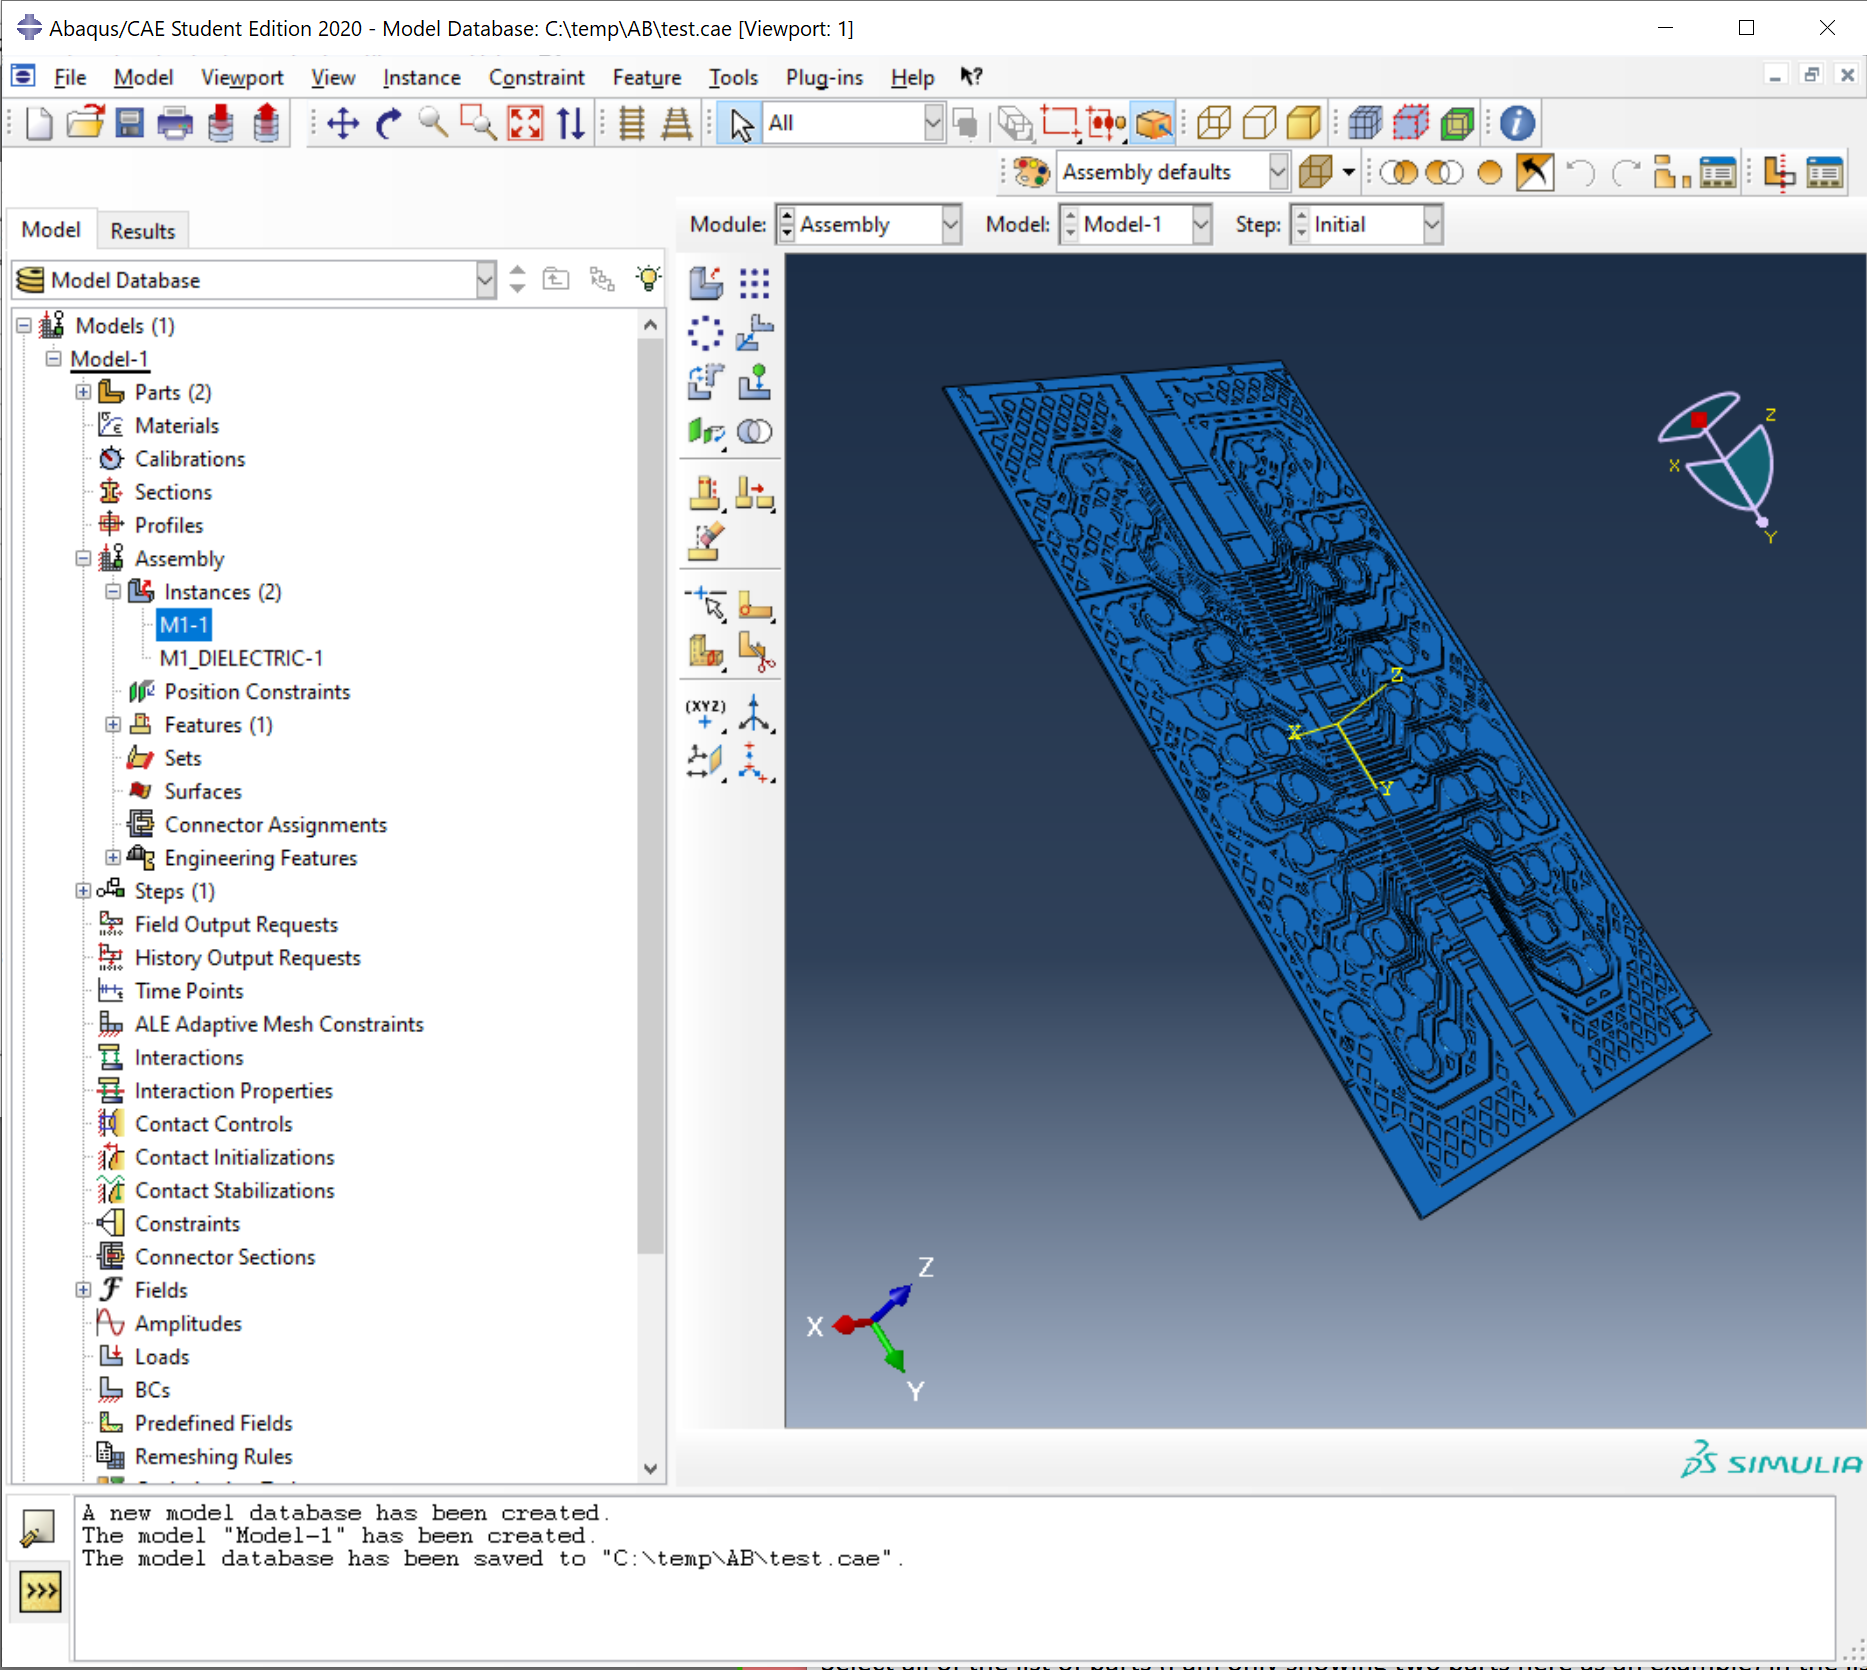 Abaqus display of the assembled model.